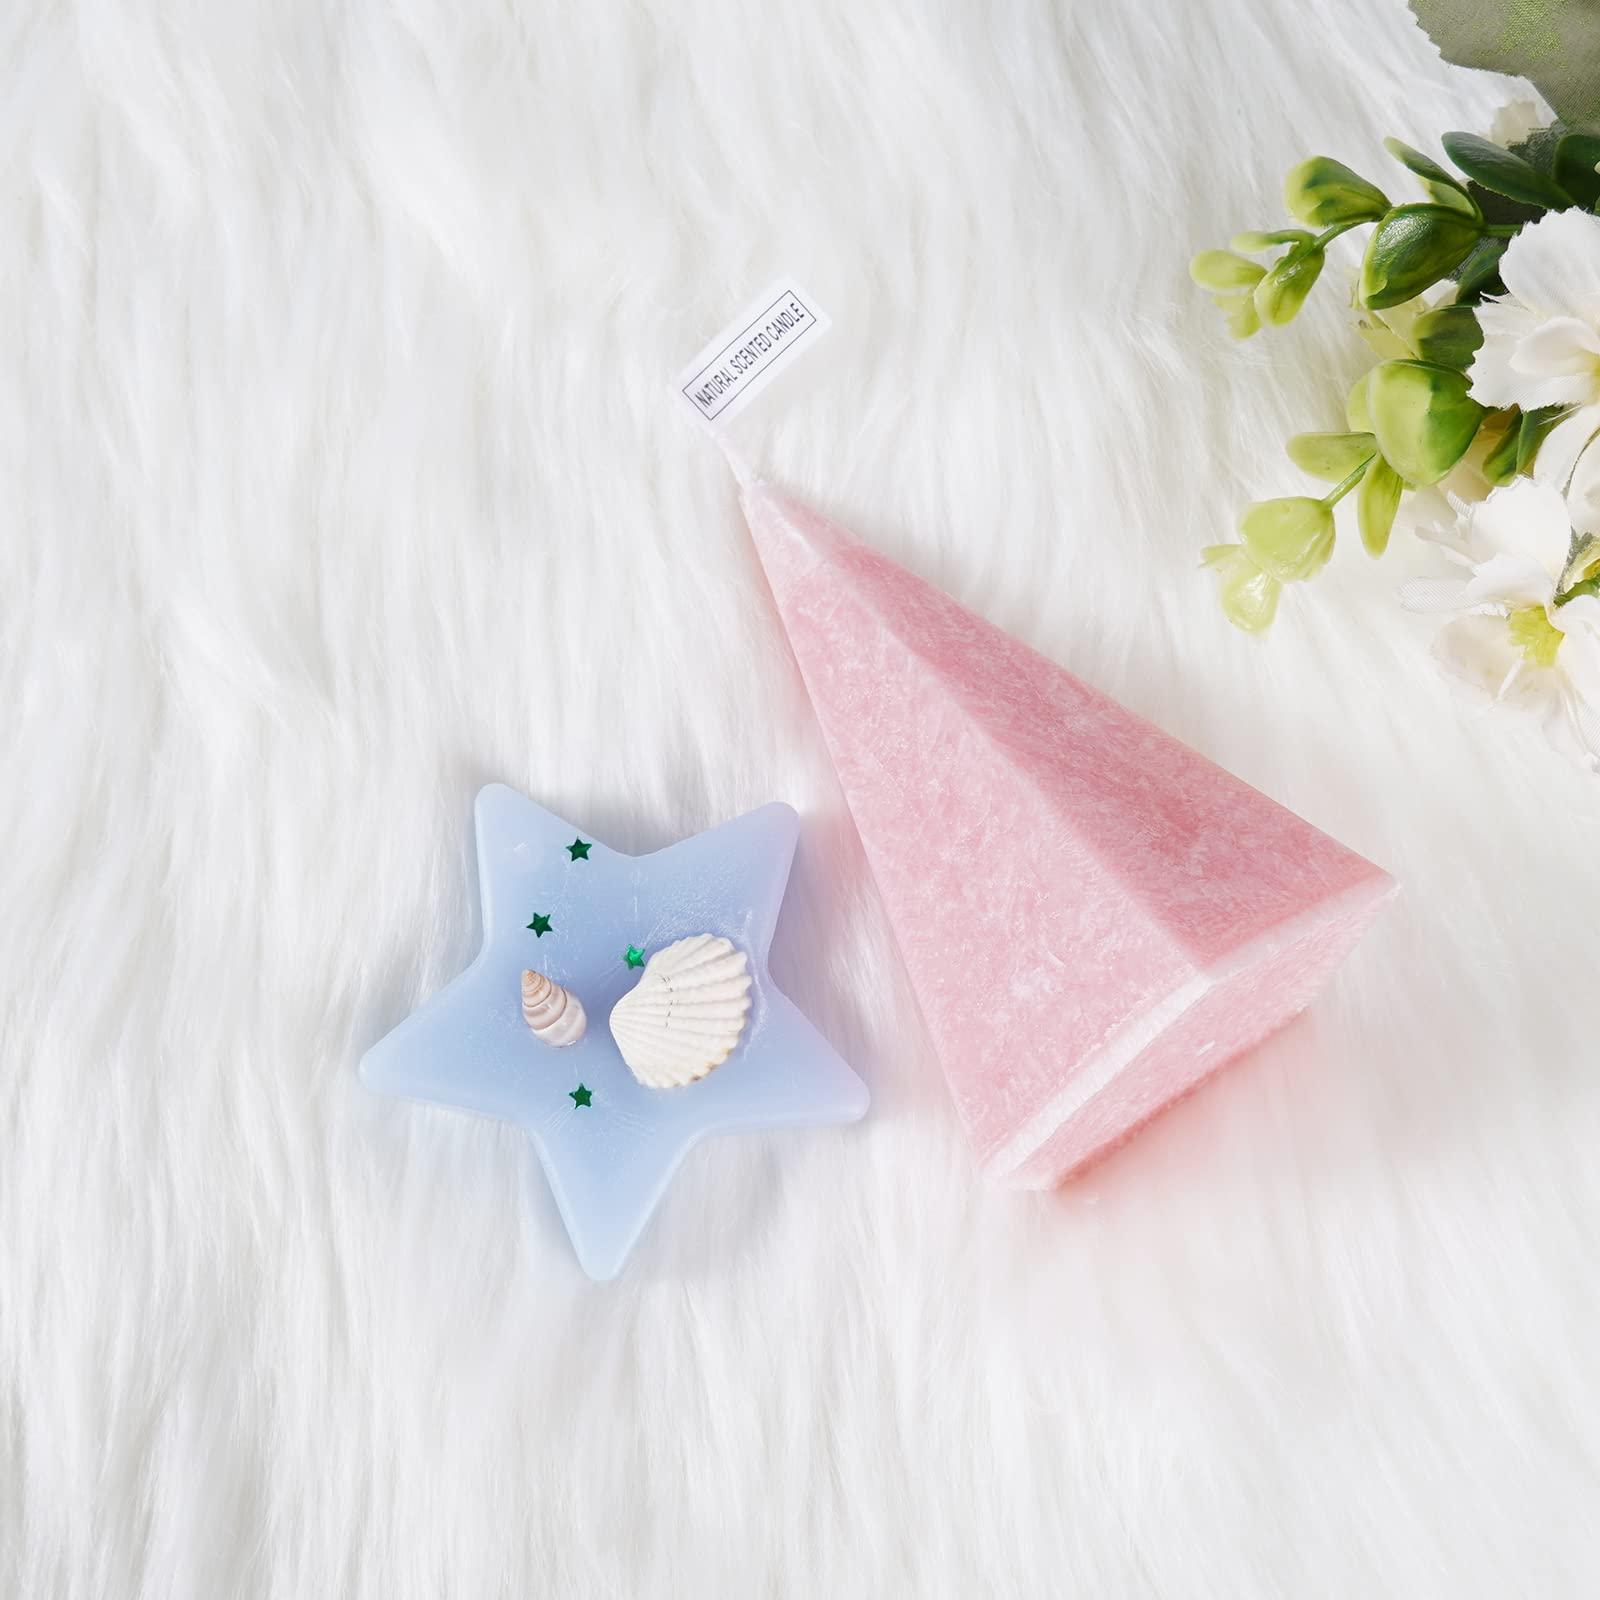 Soulnioi Geometric Cone Scented Candle(Rose), Fragrance Wax Scented Tablets for Wardrobe/Car(Ocean), Velvet Bunny Doll Charm Hanging(Pink), with Gift Box for Valentine's Day/Birthday/Anniversary 2